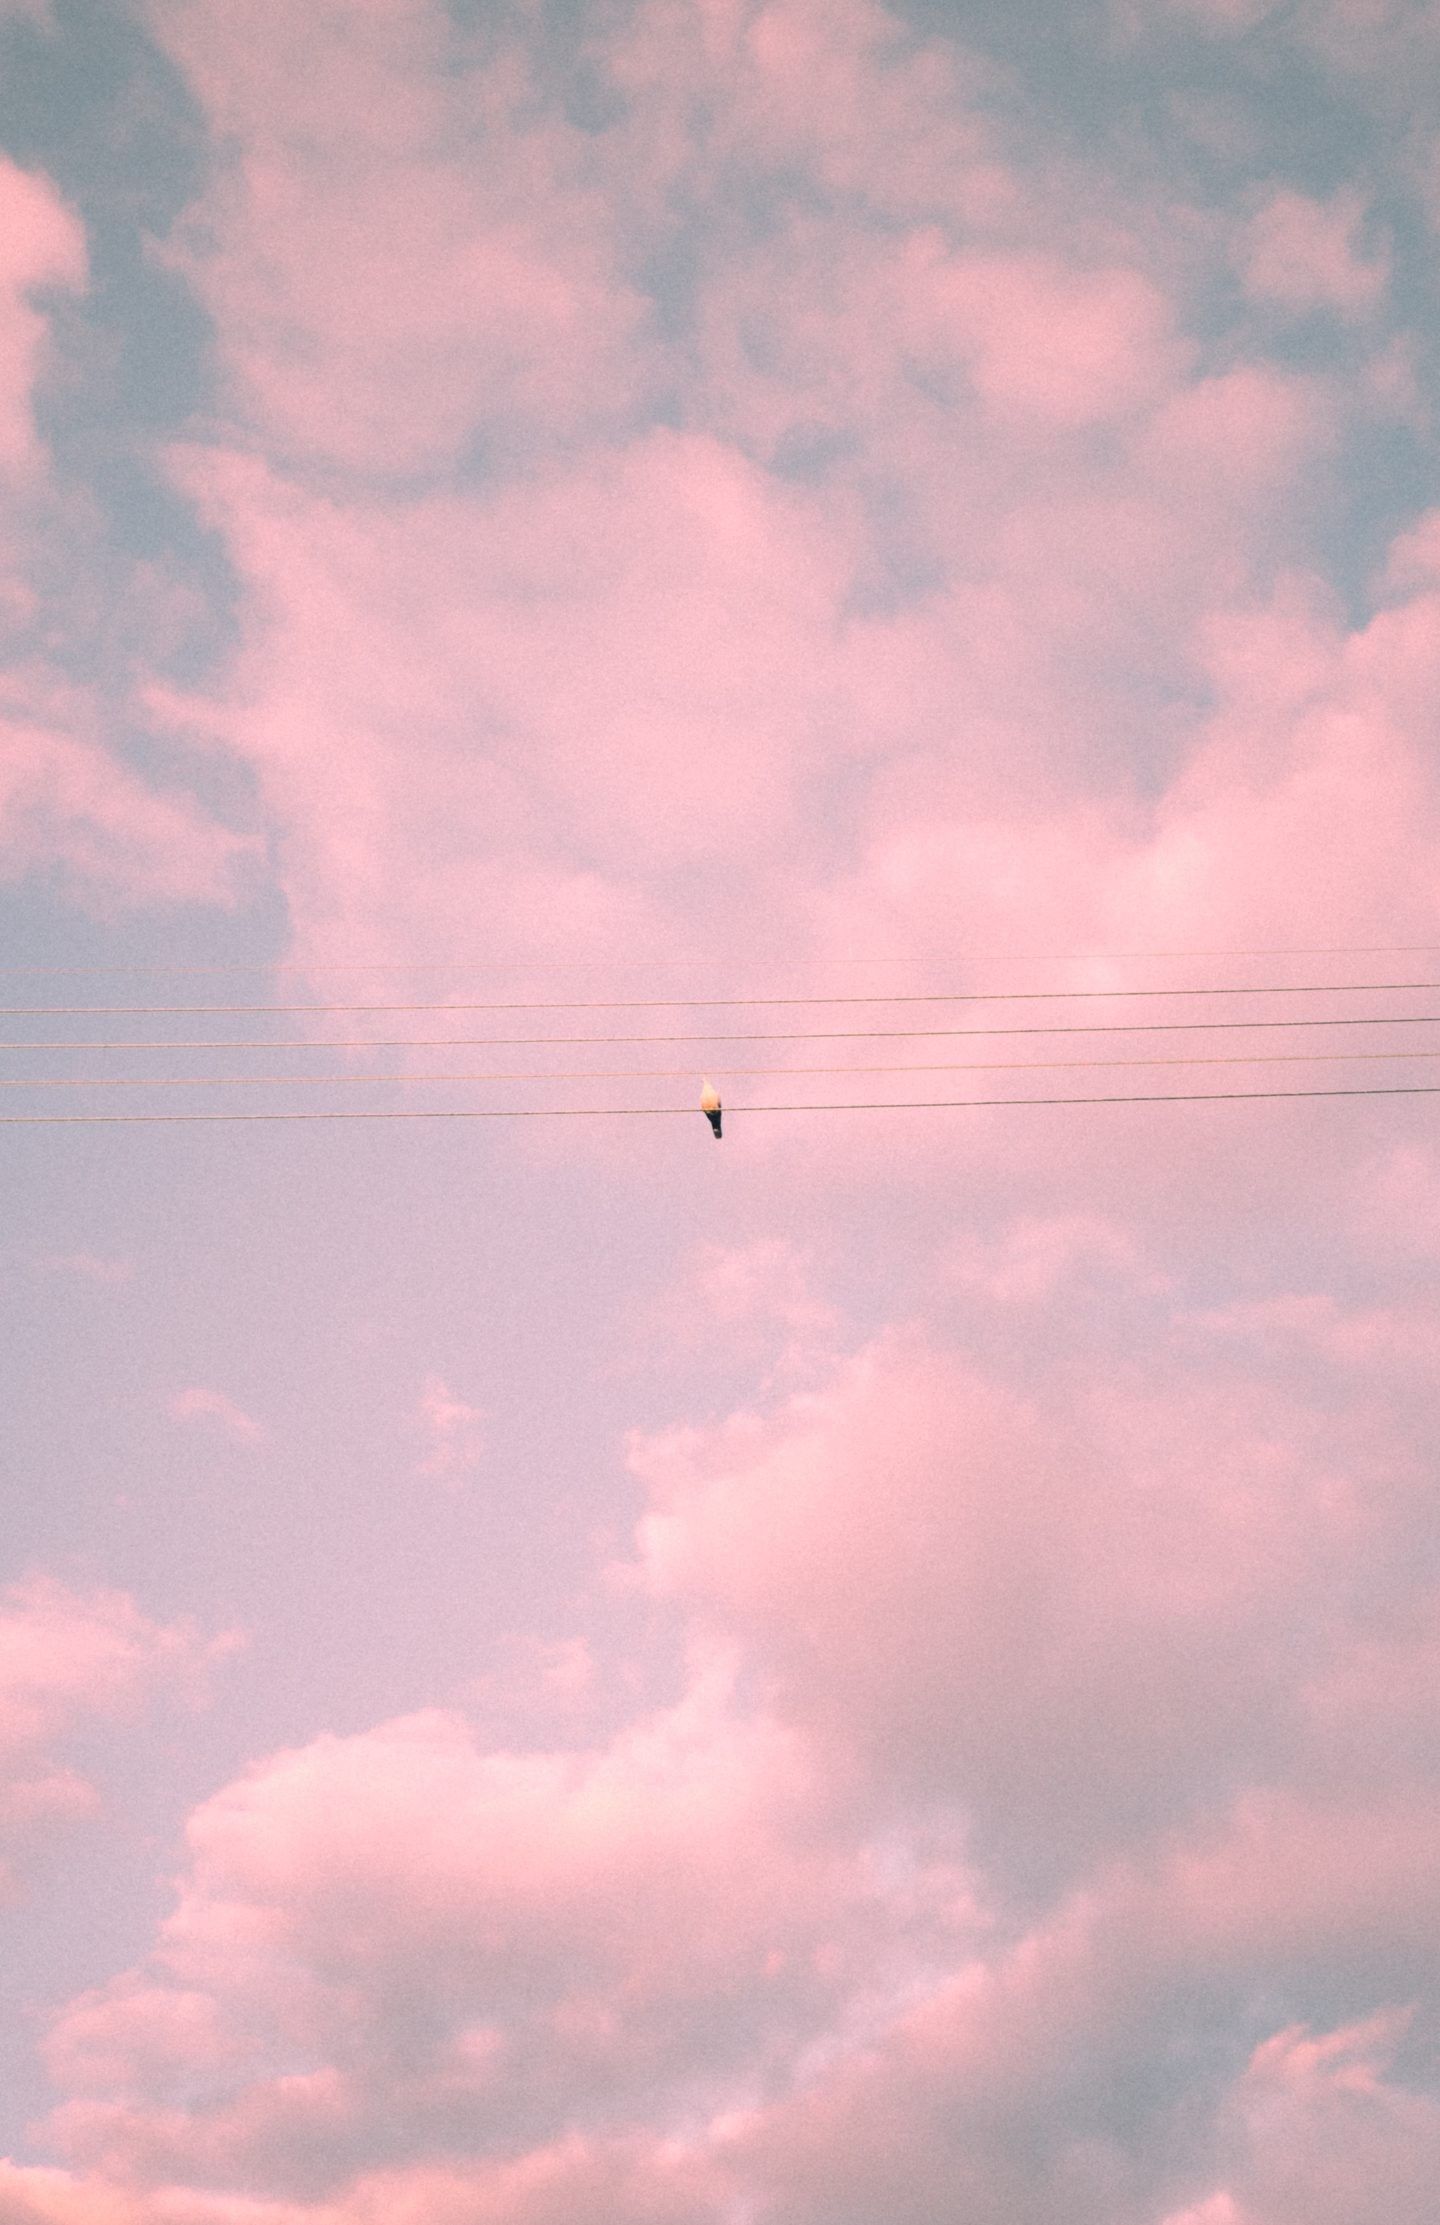 A plane flying over the clouds in pink sky - Pink phone